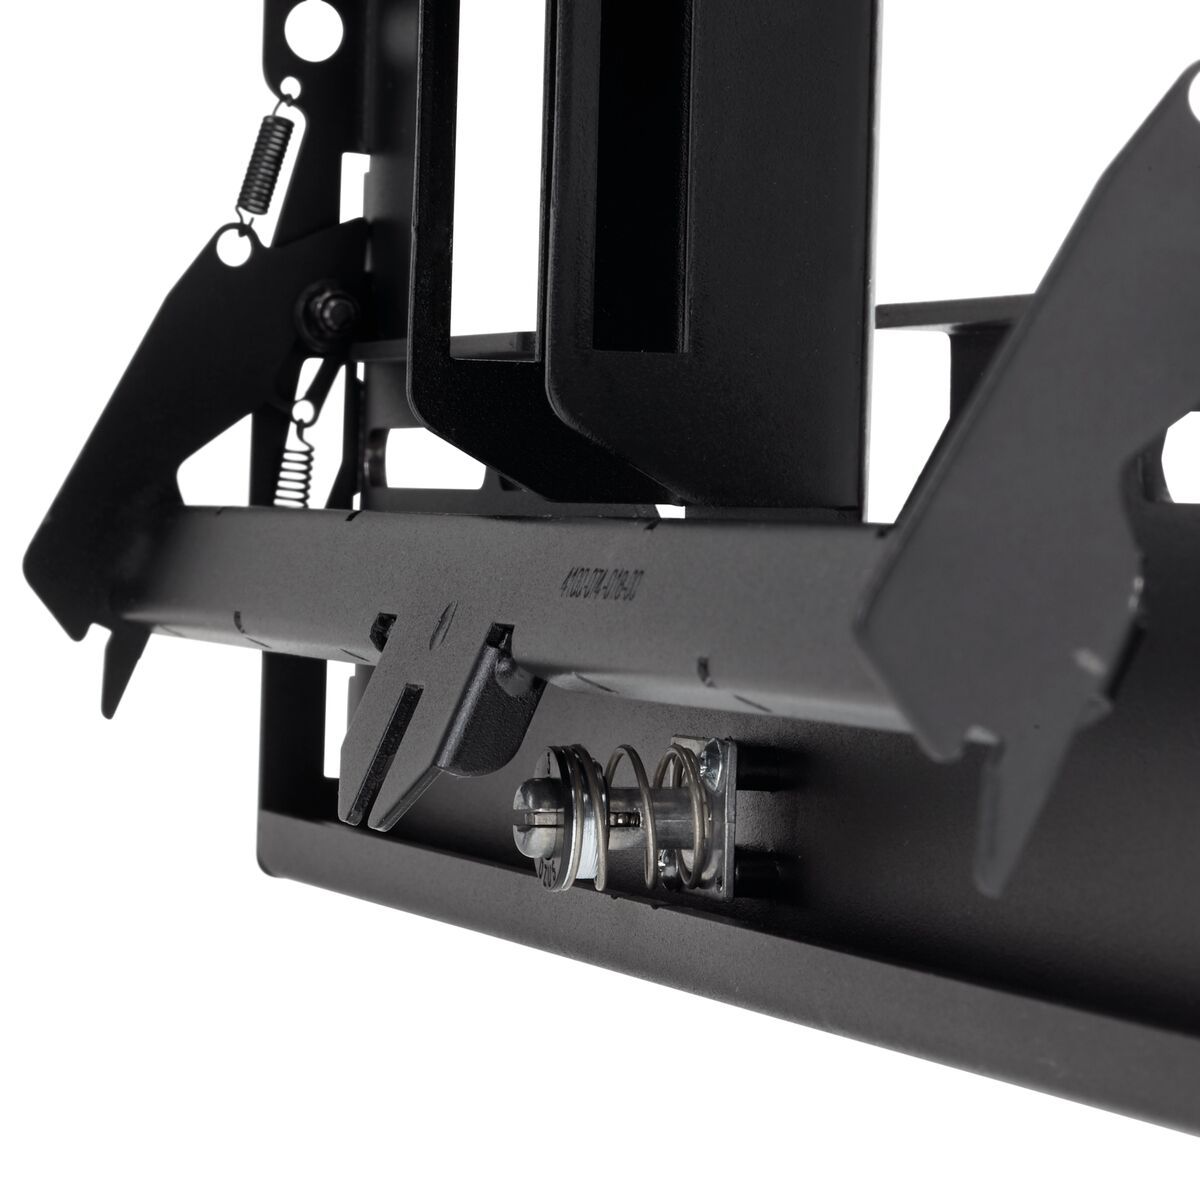 Vogel's PFW 6880 Video Wall Pop-out Wall Mount